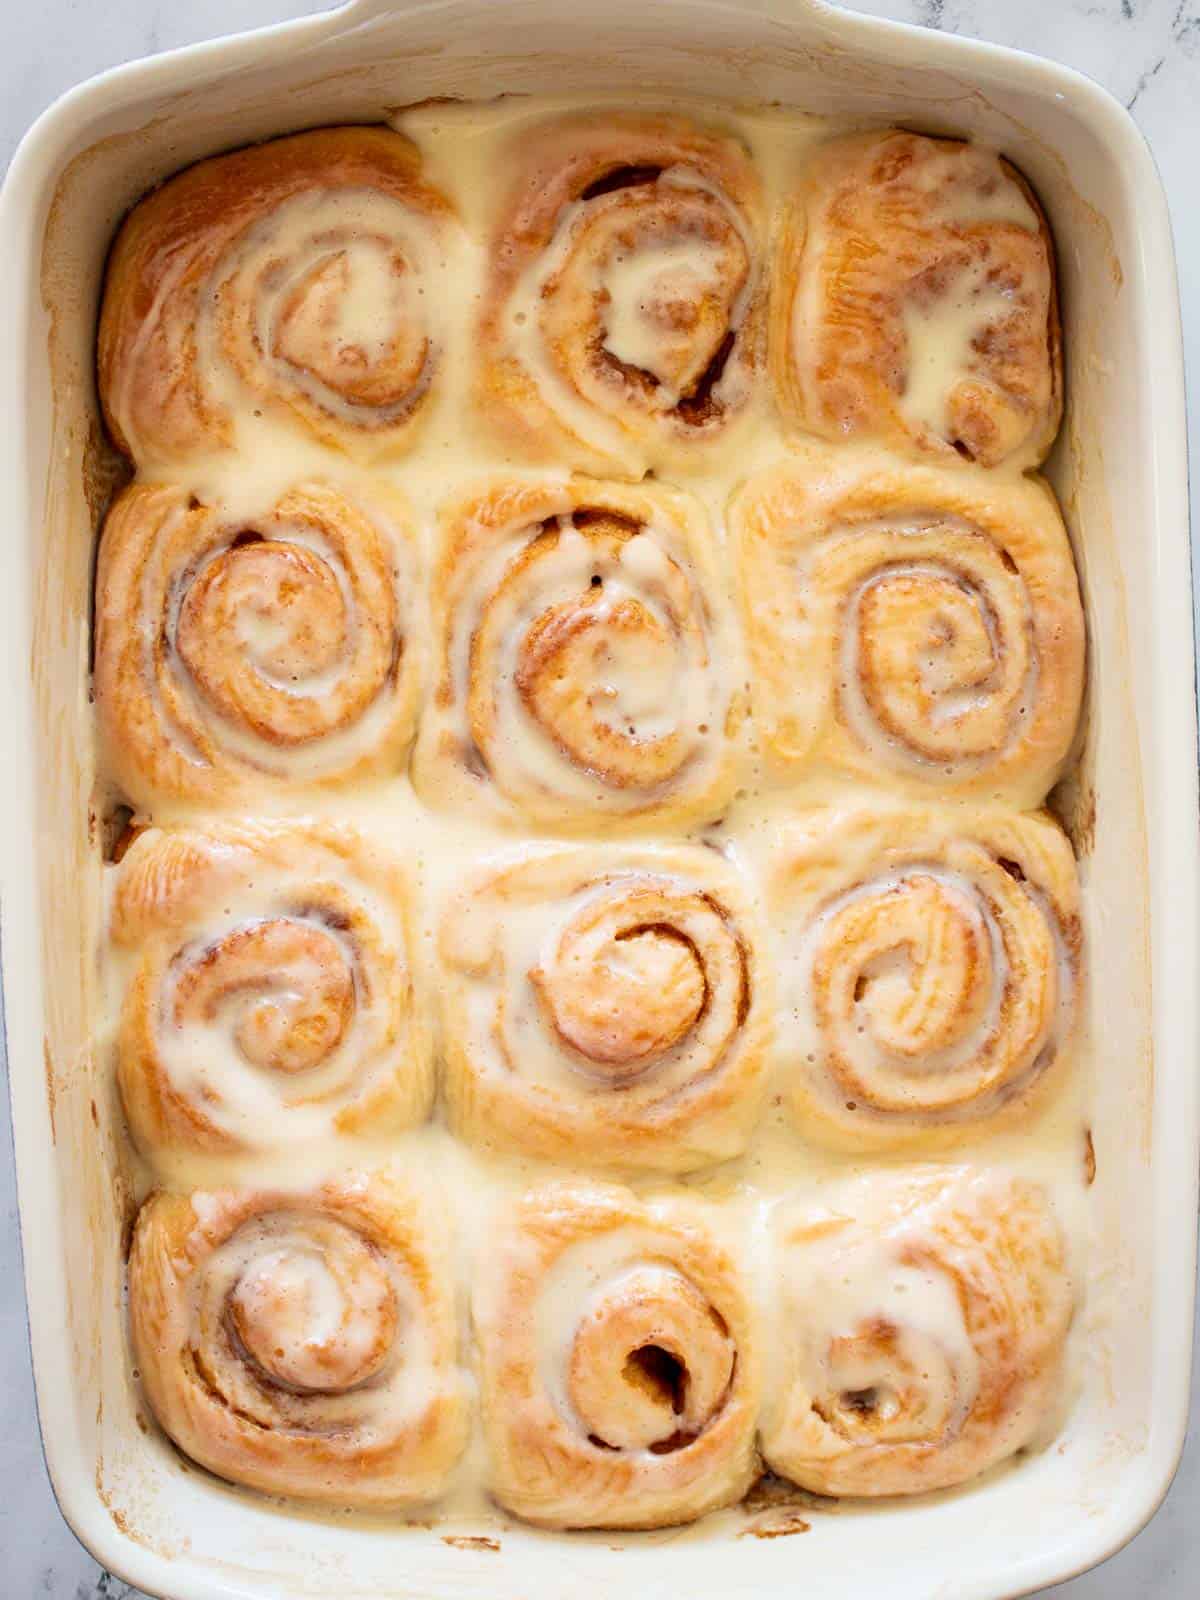 A whole pan of cinnamon rolls with icing.